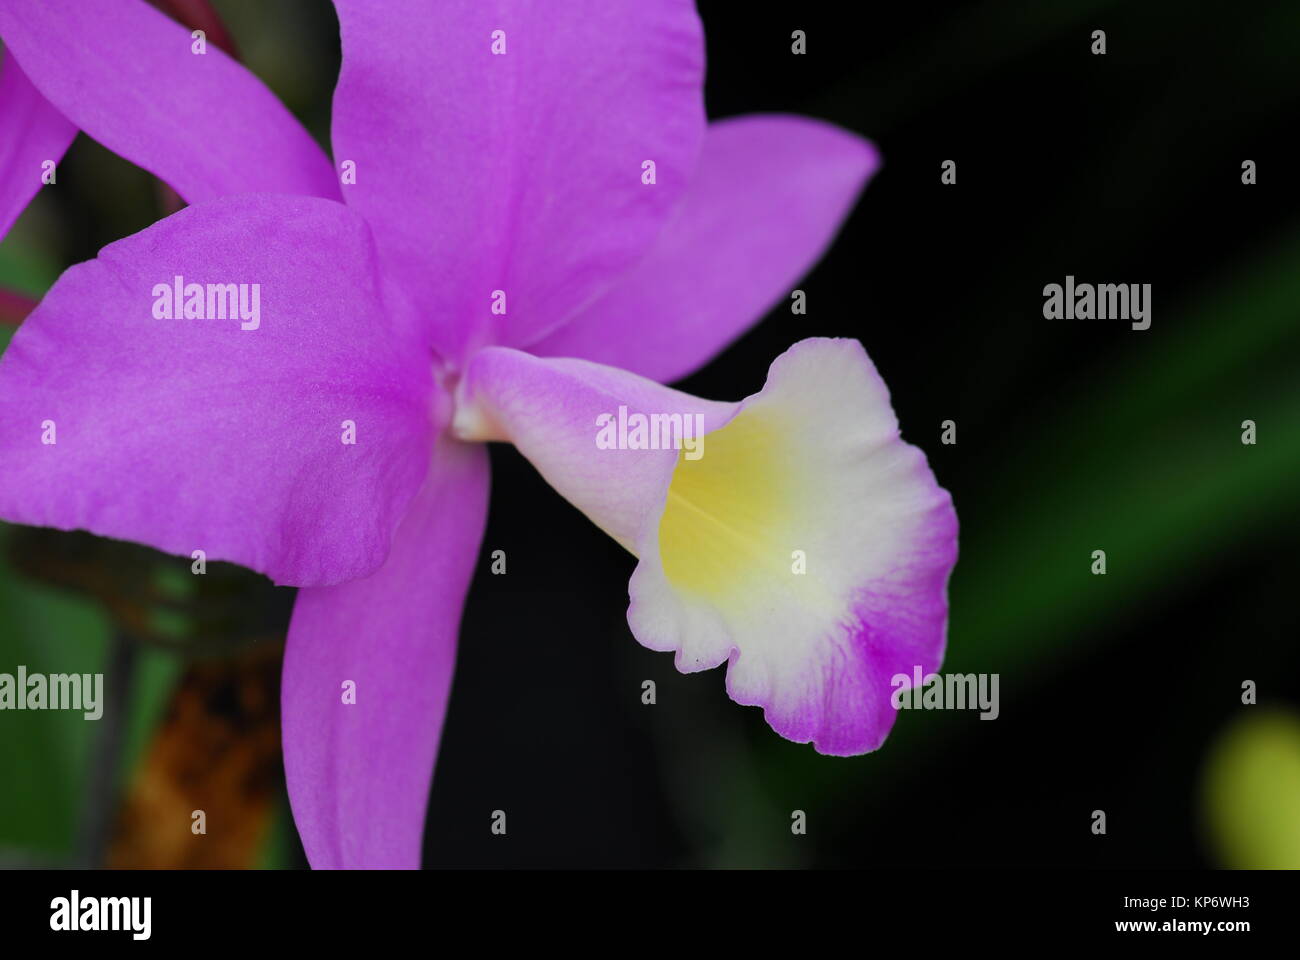 Cattleya Pink white orchid flower Stock Photo